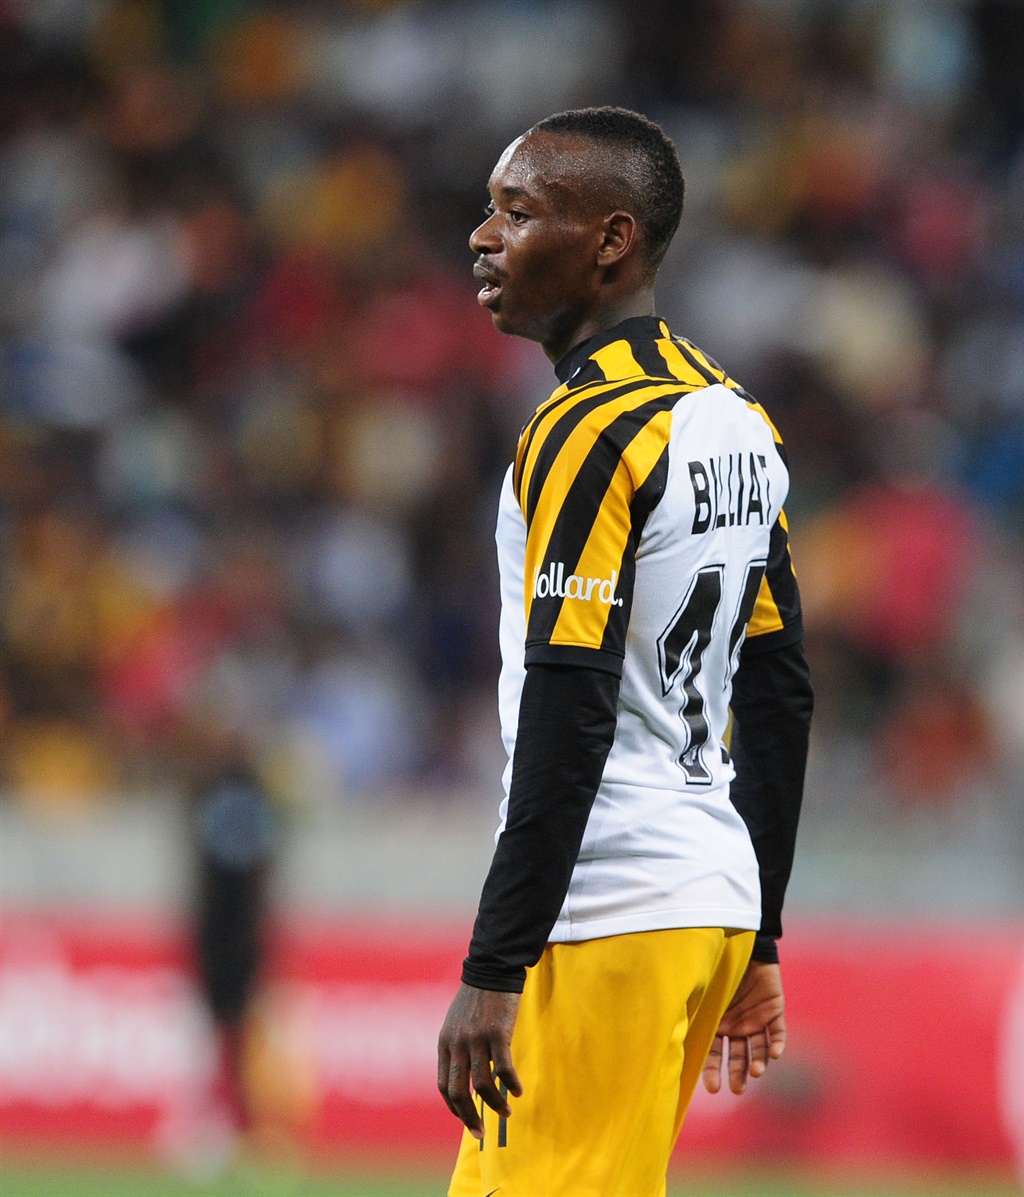 Khama Billiat of Kaizer Chiefs during the Absa Premiership 2019/20 game between Stellenbosch FC and Kaizer Chiefs at Cape Town Stadium on 27 November 2019